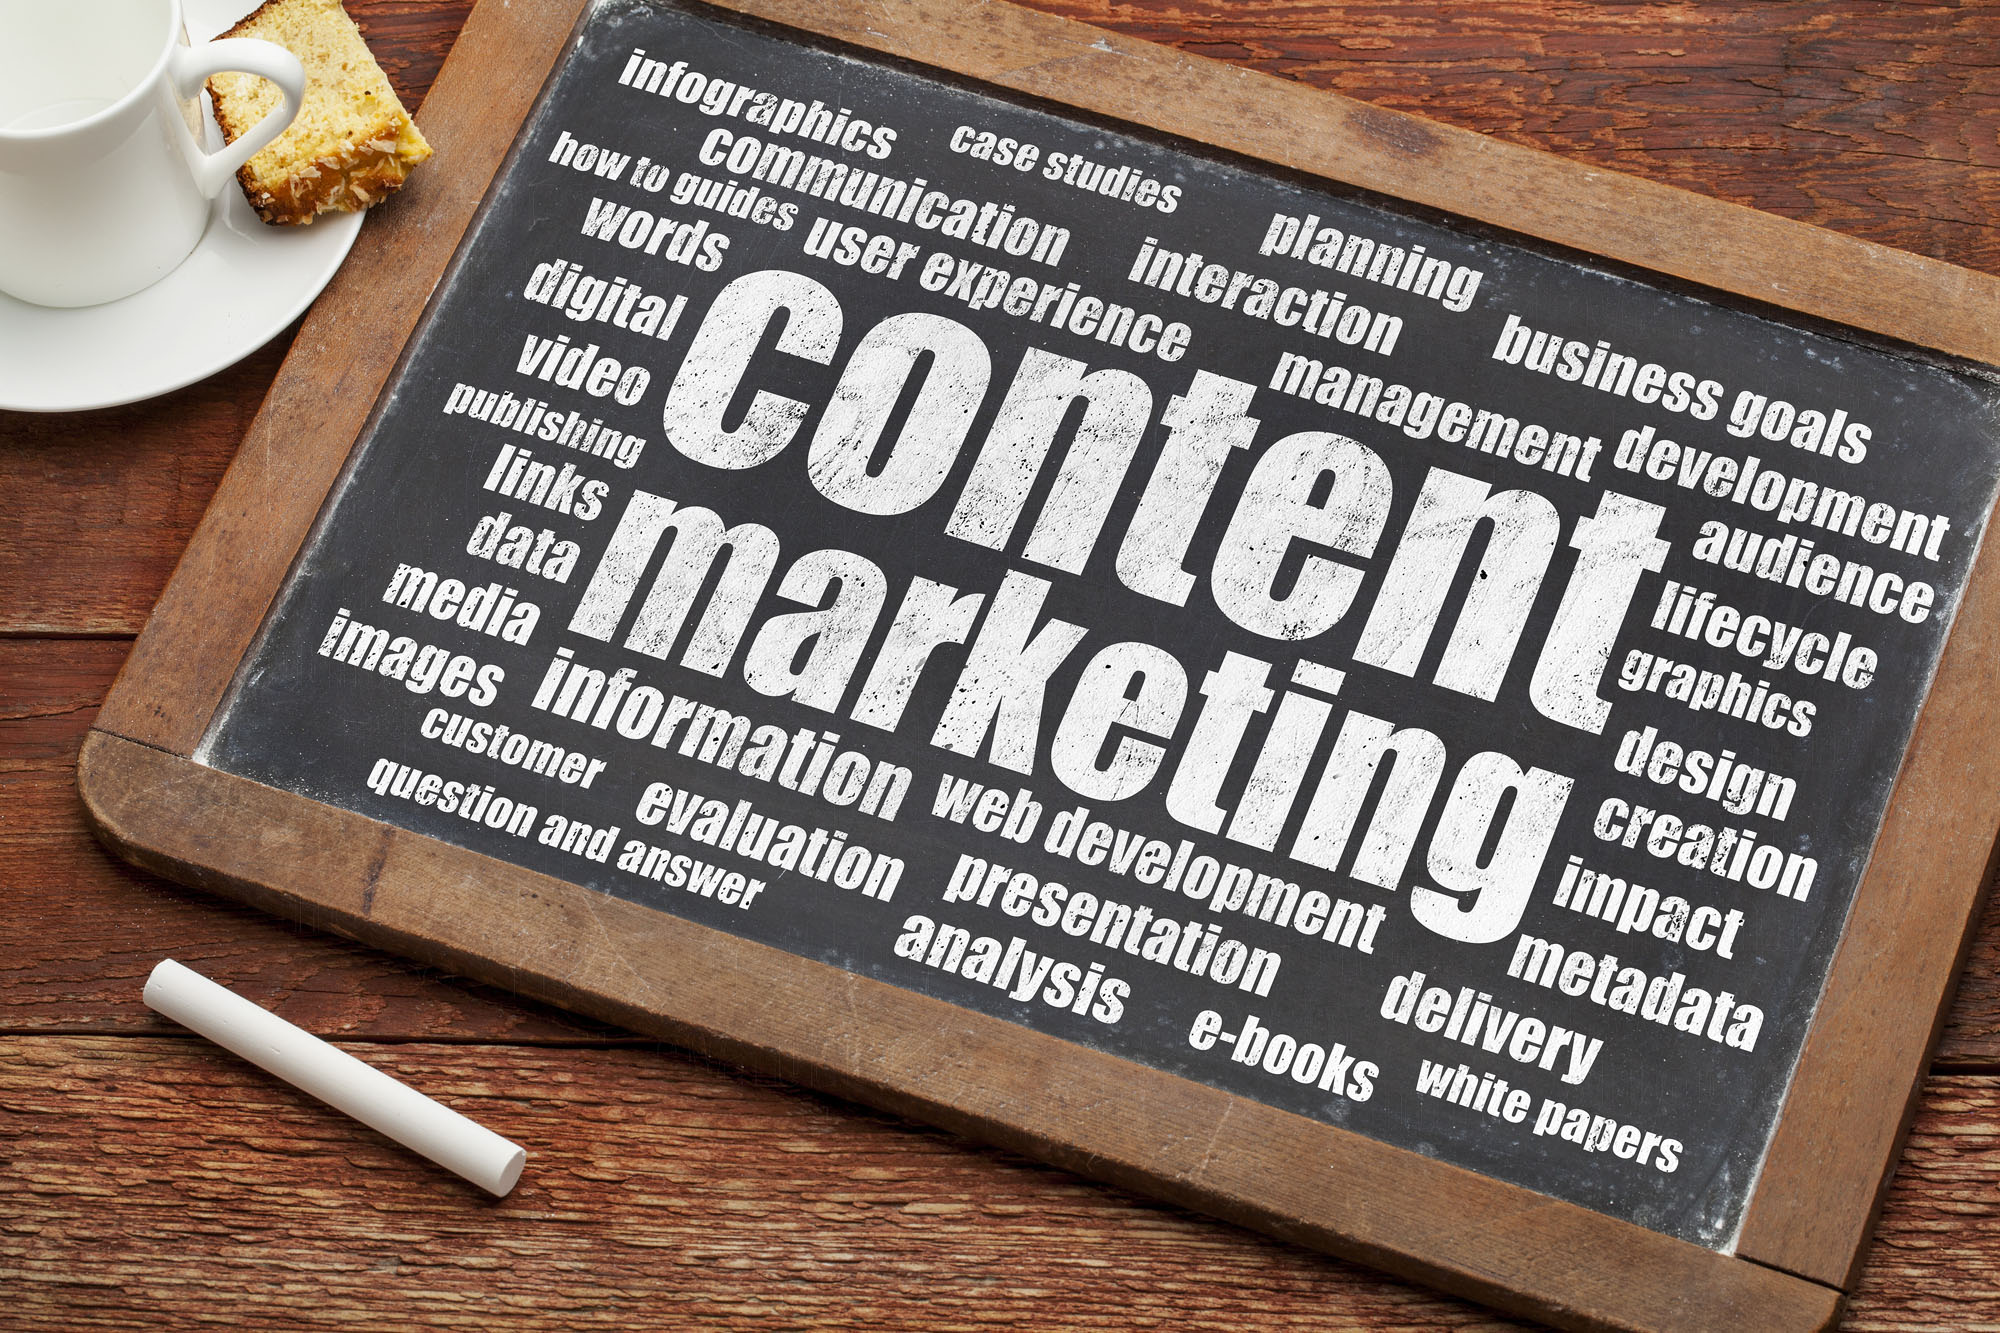 4 Benefits of Content Marketing